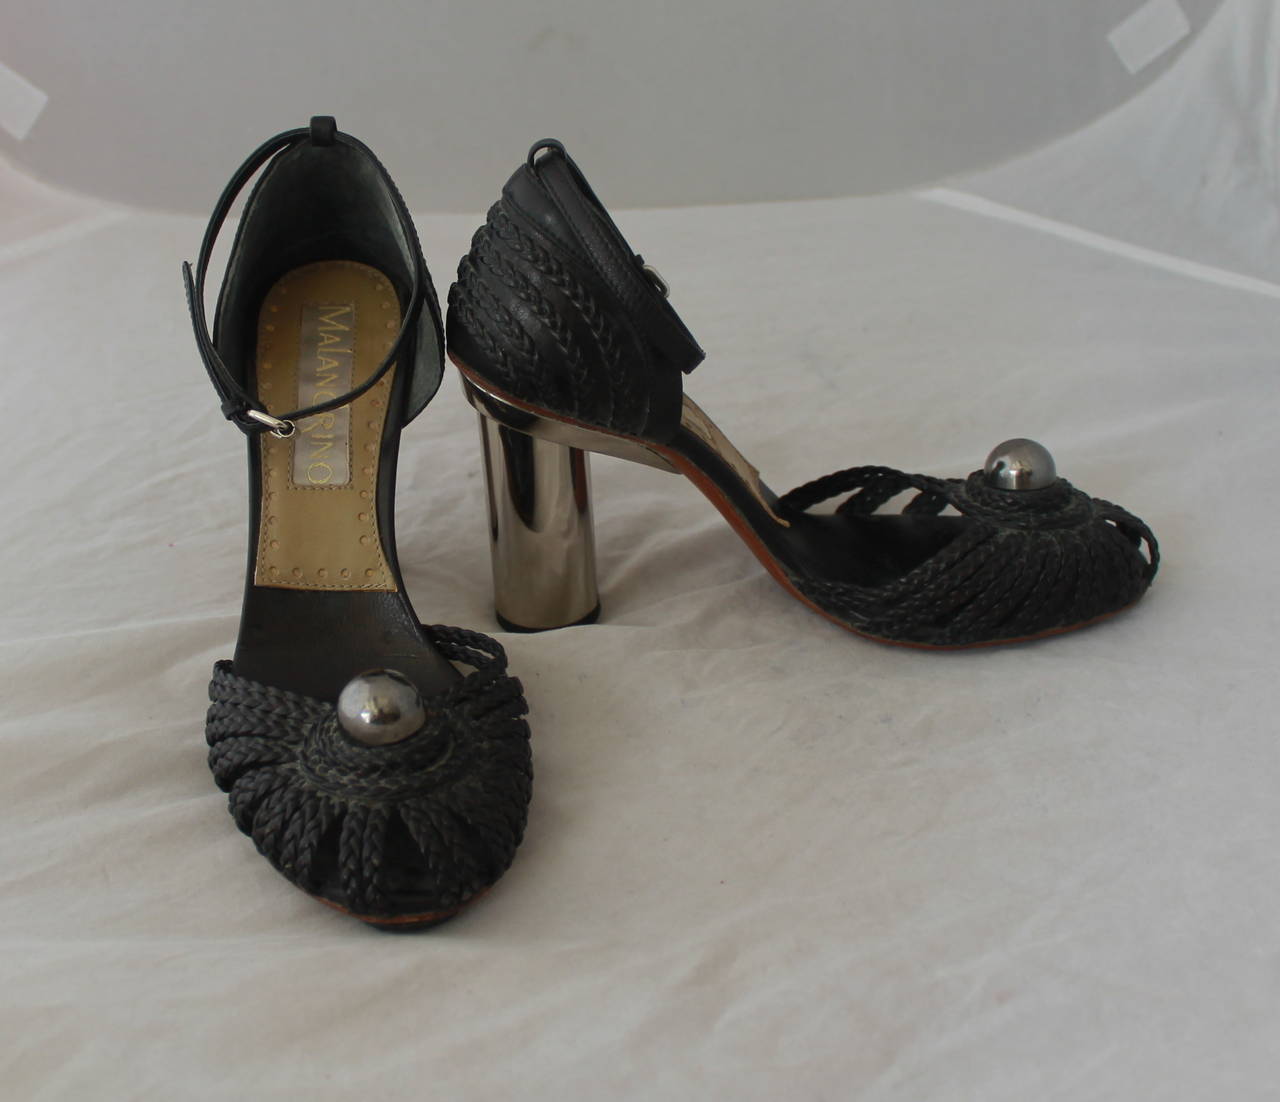 Malandrino 1990's Vintage Black Braided Leather Heels with Ankle Strap -  36.5. These shoes are in good vintage condition with some signs of age by dulling on the leather. The shoe has a thick silver heel and a thin ankle strap. It has some wear on